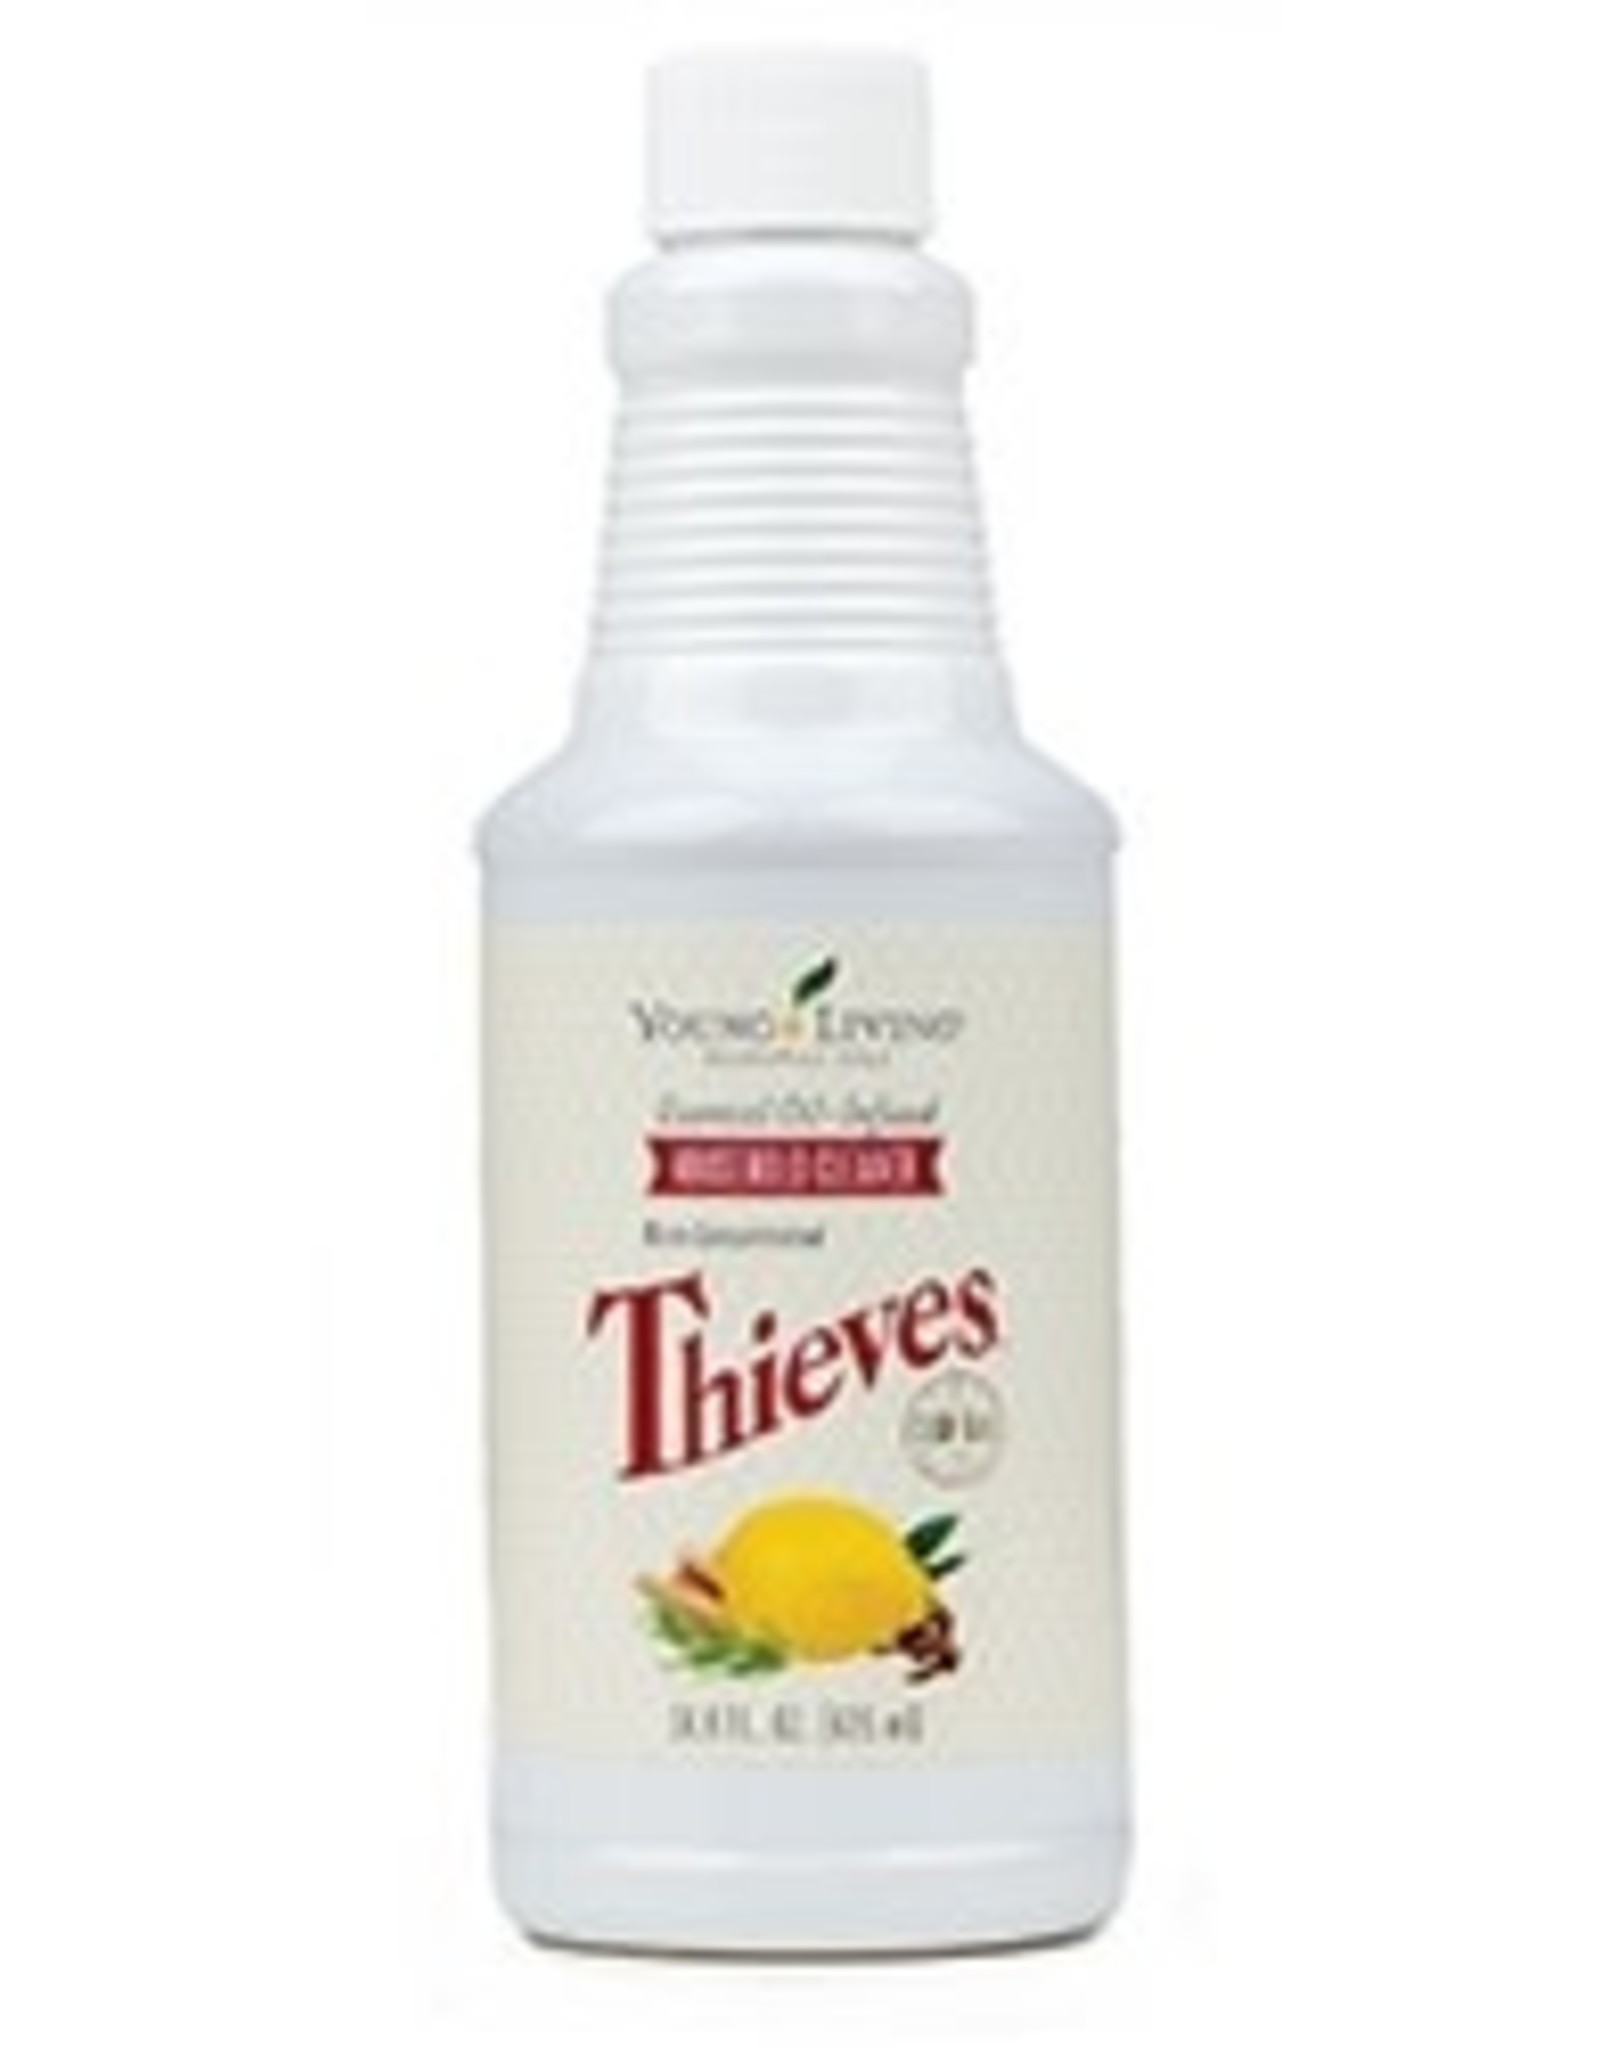 Young Living Thieves Household Cleaner (14.4 oz.)